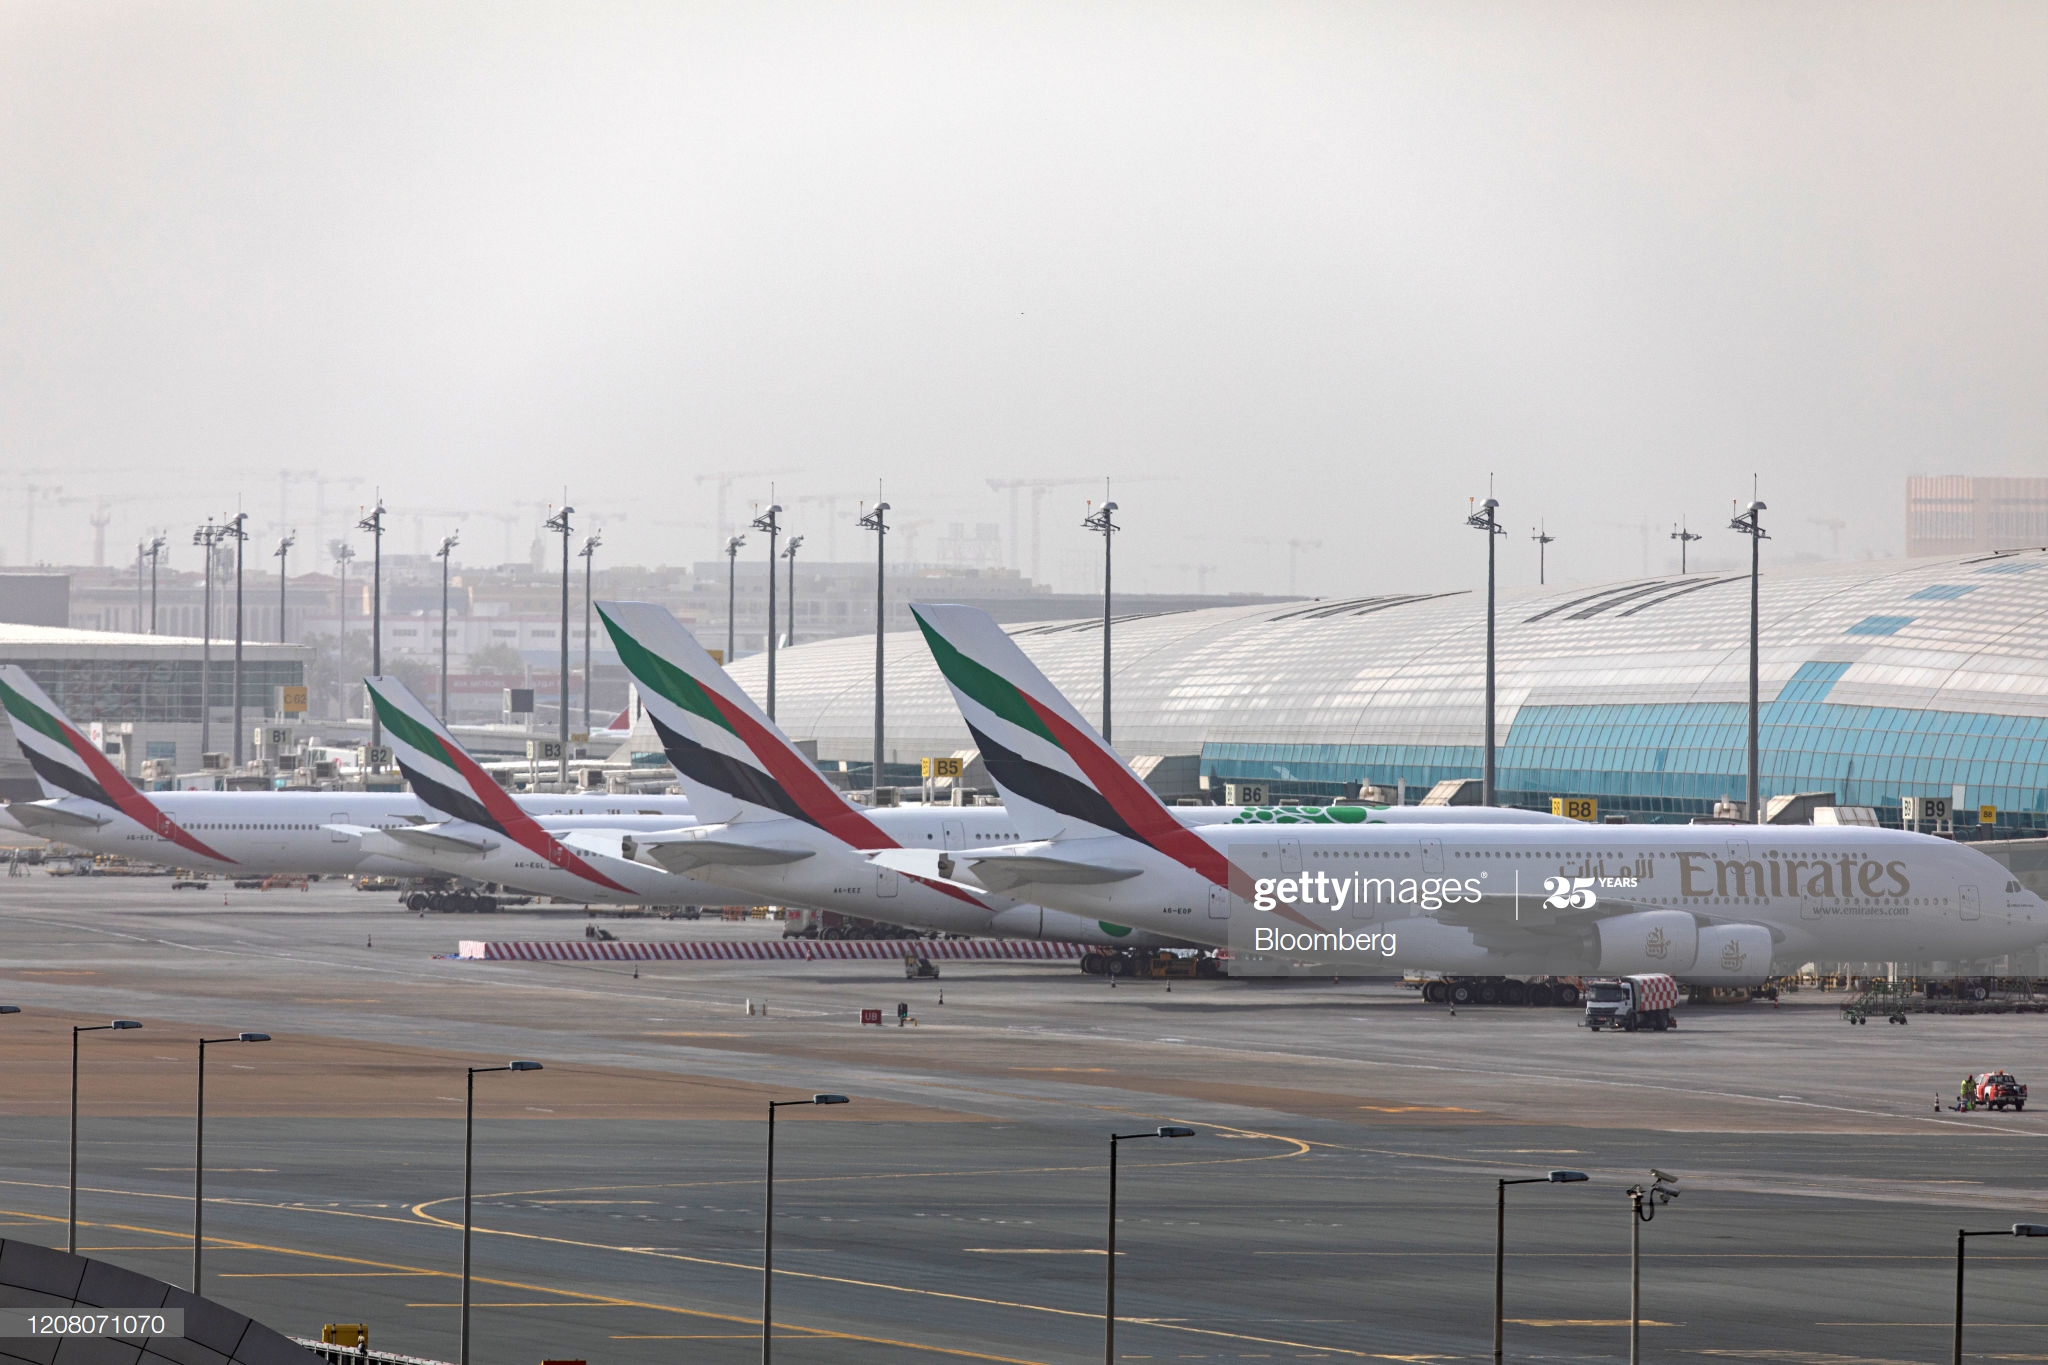 an-airbus-se-a380800-aircraft-right-stands-alongside-a-line-of-boeing-picture-id1208071070